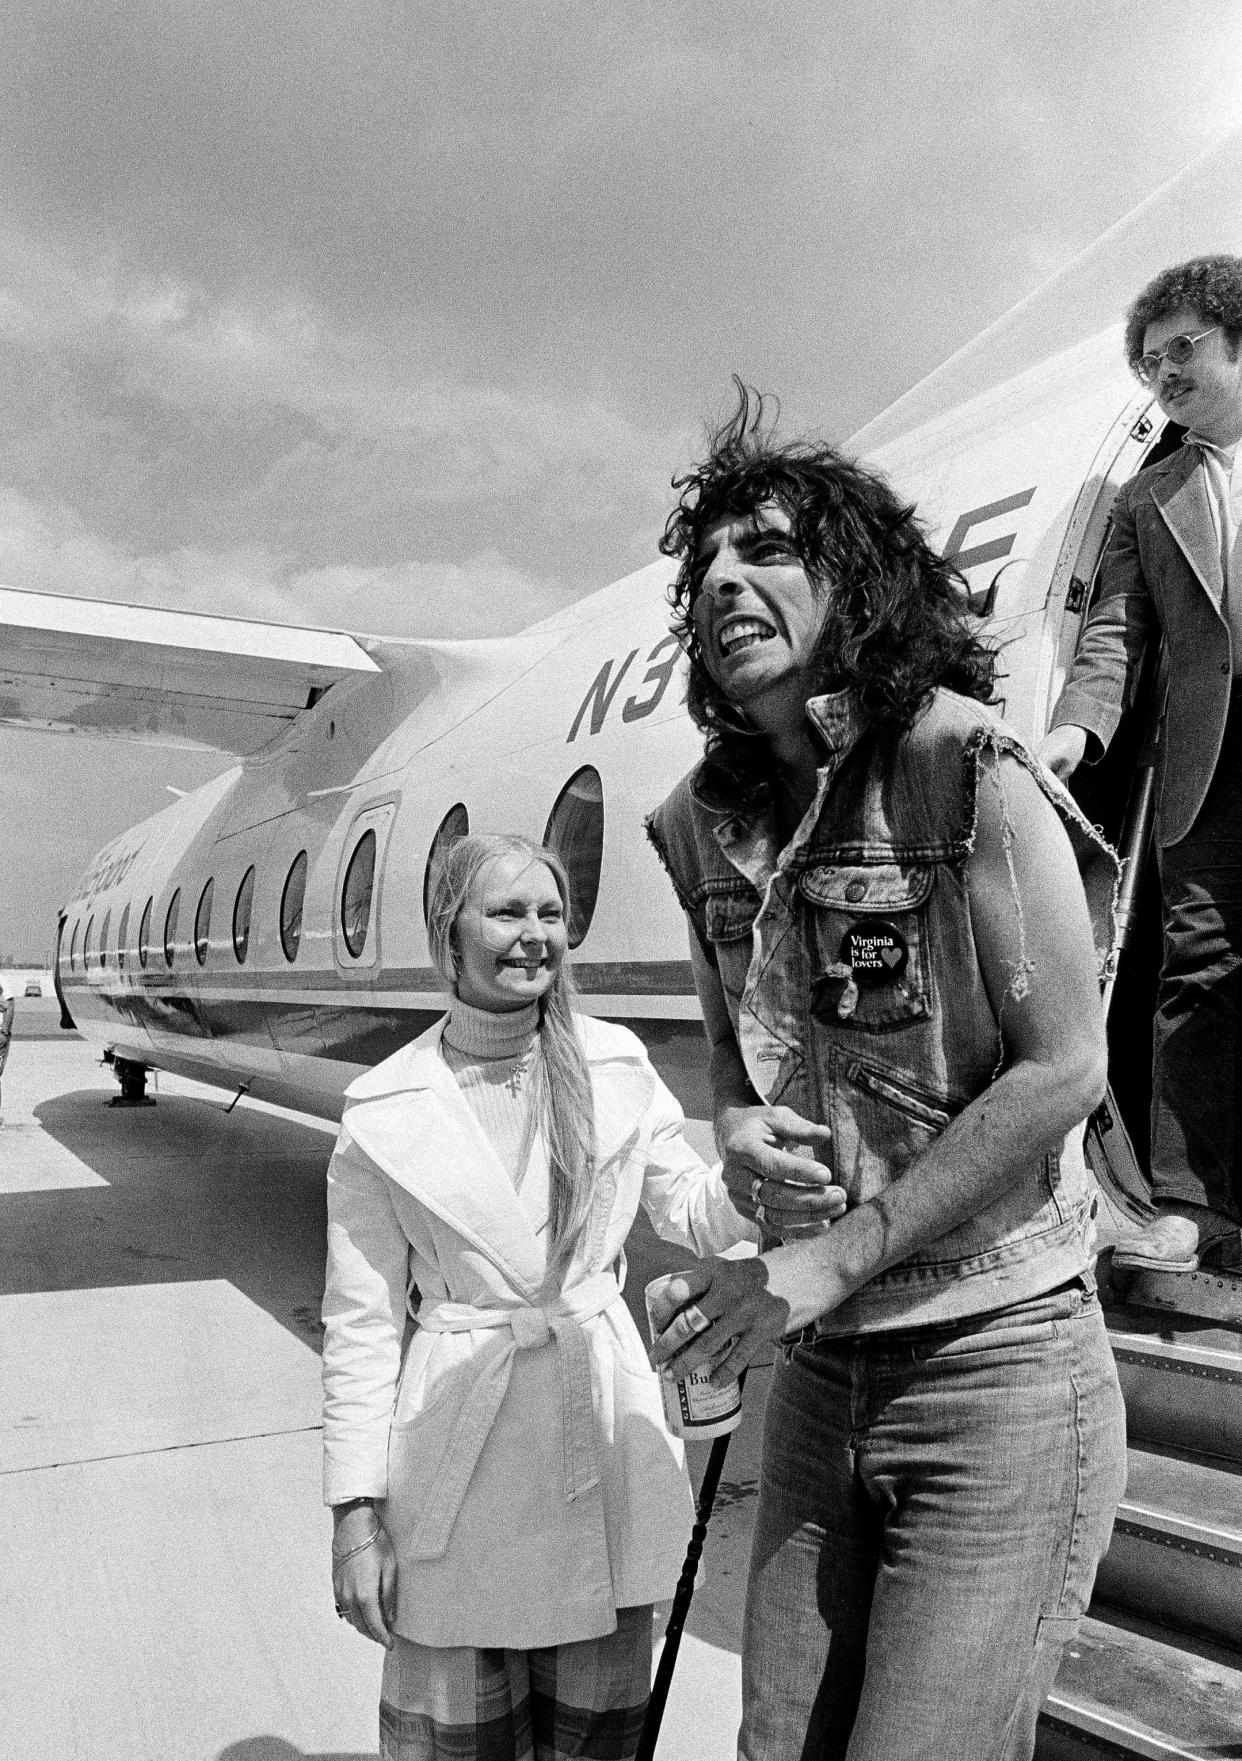 Glam rock star, Alice Cooper, right, reacts to the cold weather as he arrives at Logan International Airport in Boston, Mass., on a chartered Air New England flight from Philadelphia, April 26, 1975. Hostess Roberta Anderson sees Cooper off the plane. Cooper and his band will perform at Boston Garden. (AP Photo/J. Walter Green)